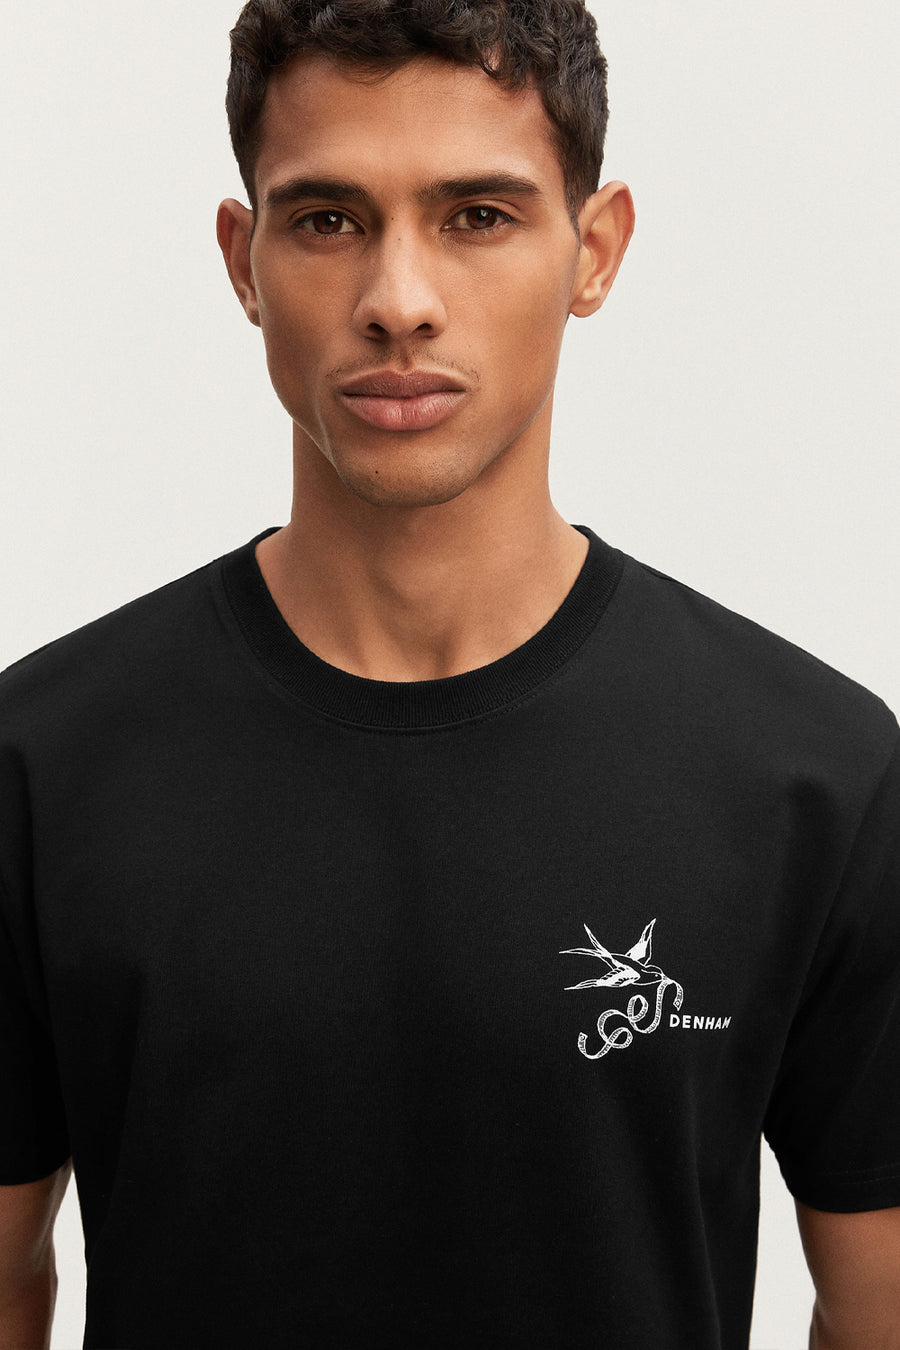 Buy the Denham DXT Paris Heavy Jersey T-Shirt in Black at Intro. Spend £50 for free UK delivery. Official stockists. We ship worldwide.